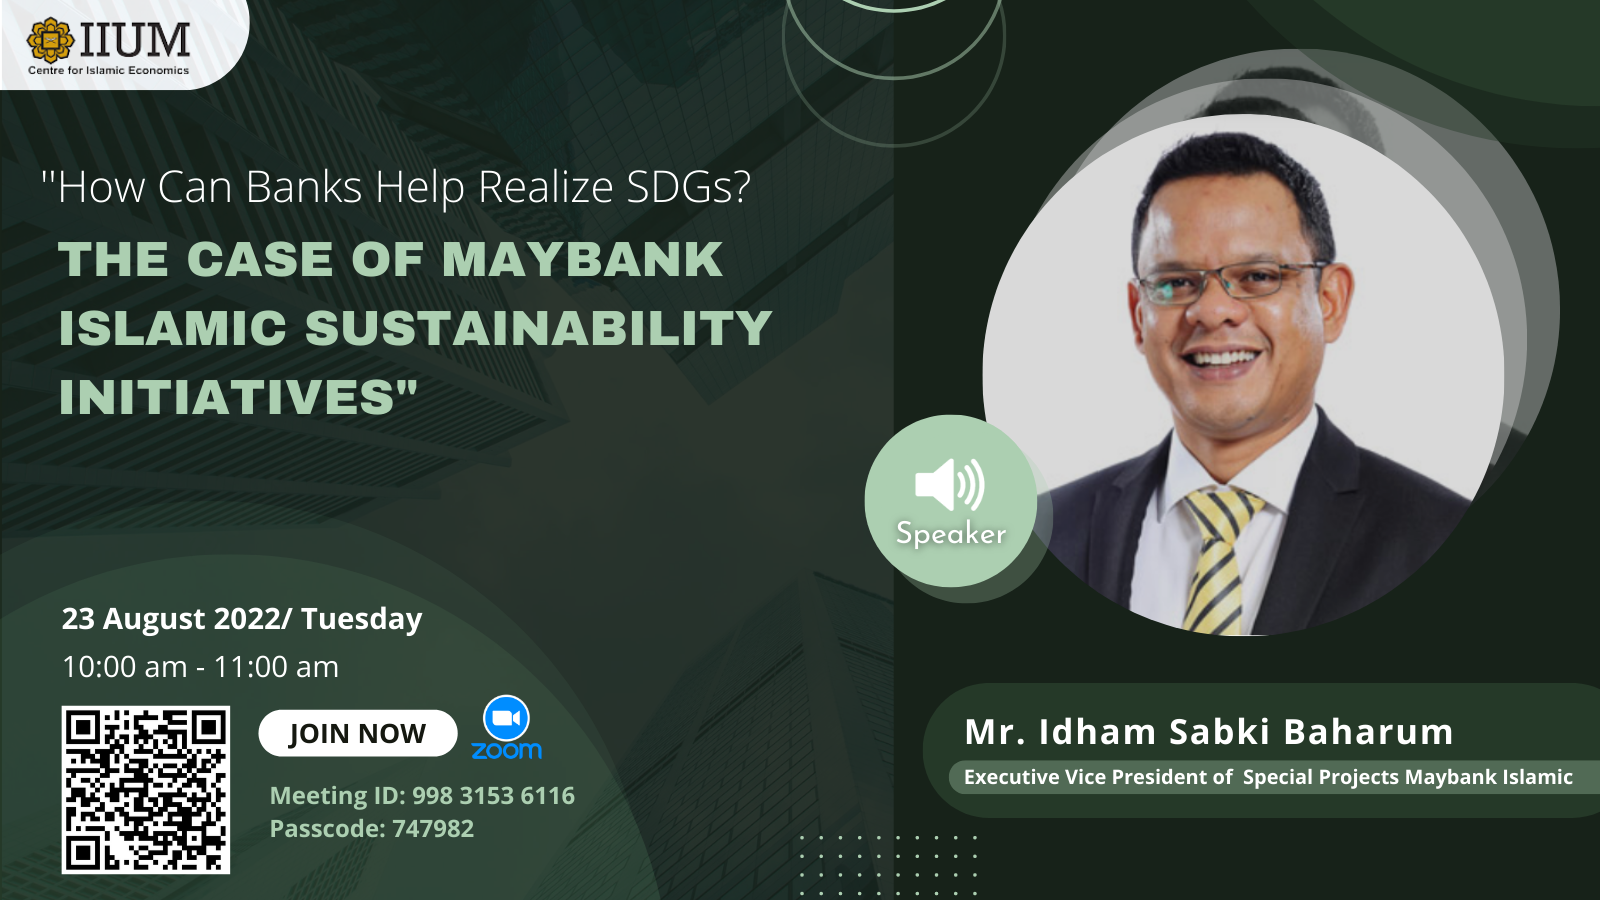 How Can Banks Help Realize SDGs? The Case of Maybank Islamic Sustainability Initiatives